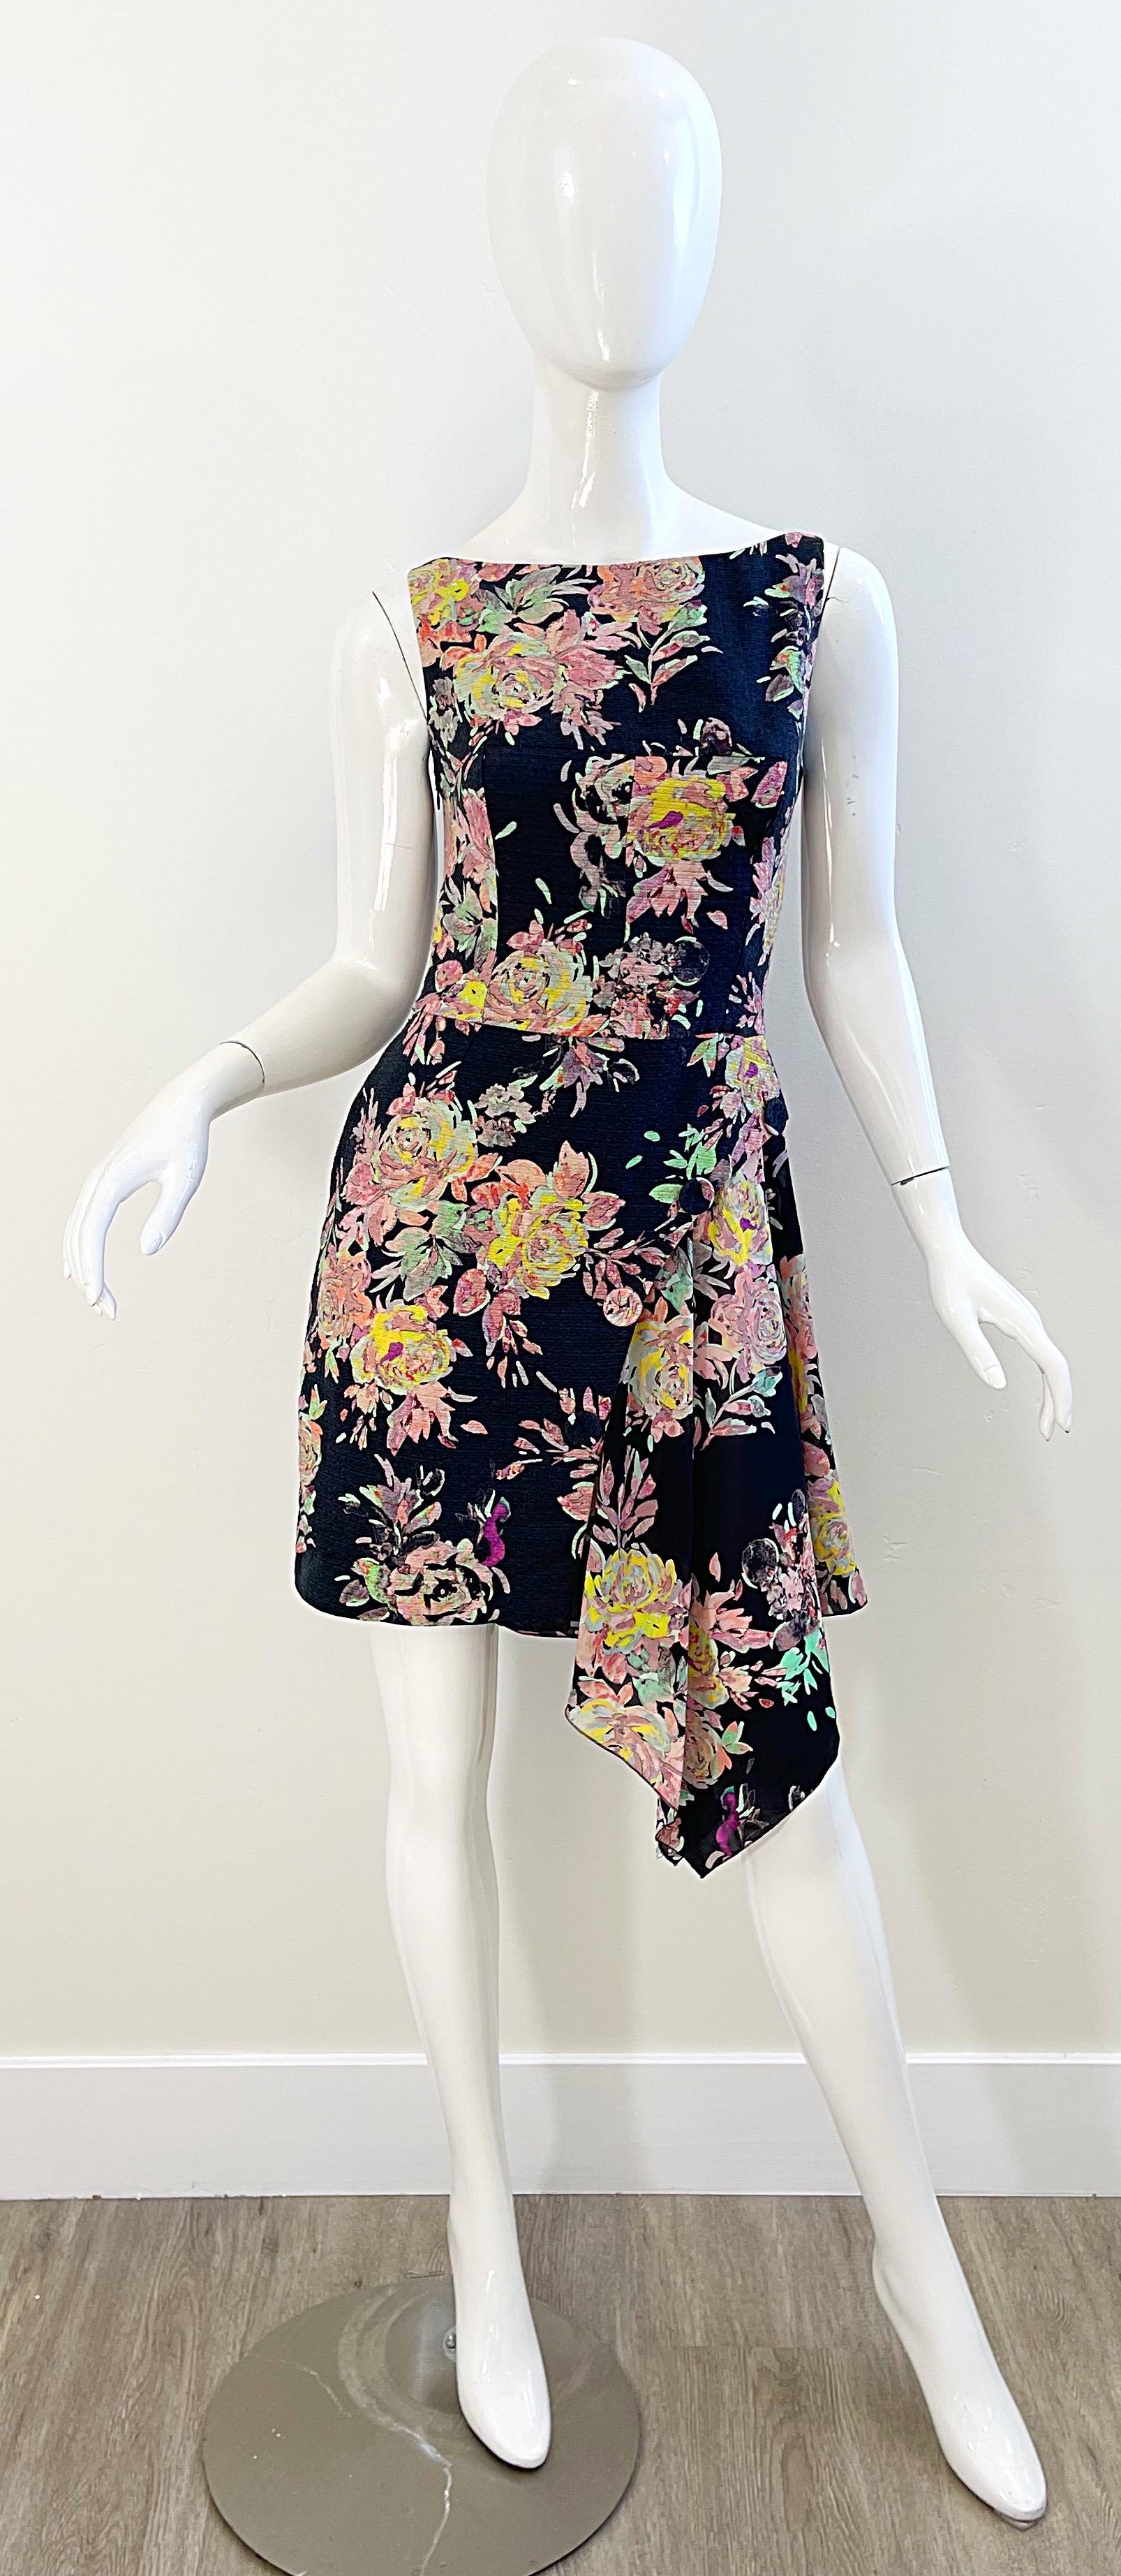 Chic early 2000s EMANUEL UNGARO cotton and silk handkerchief hem dress ! Features a soft cotton bodice with a flowy chiffon side hem. Black base with colorful floral prints in pink, yellow, green, fuchsia, and orange throughout. Hidden zipper up the